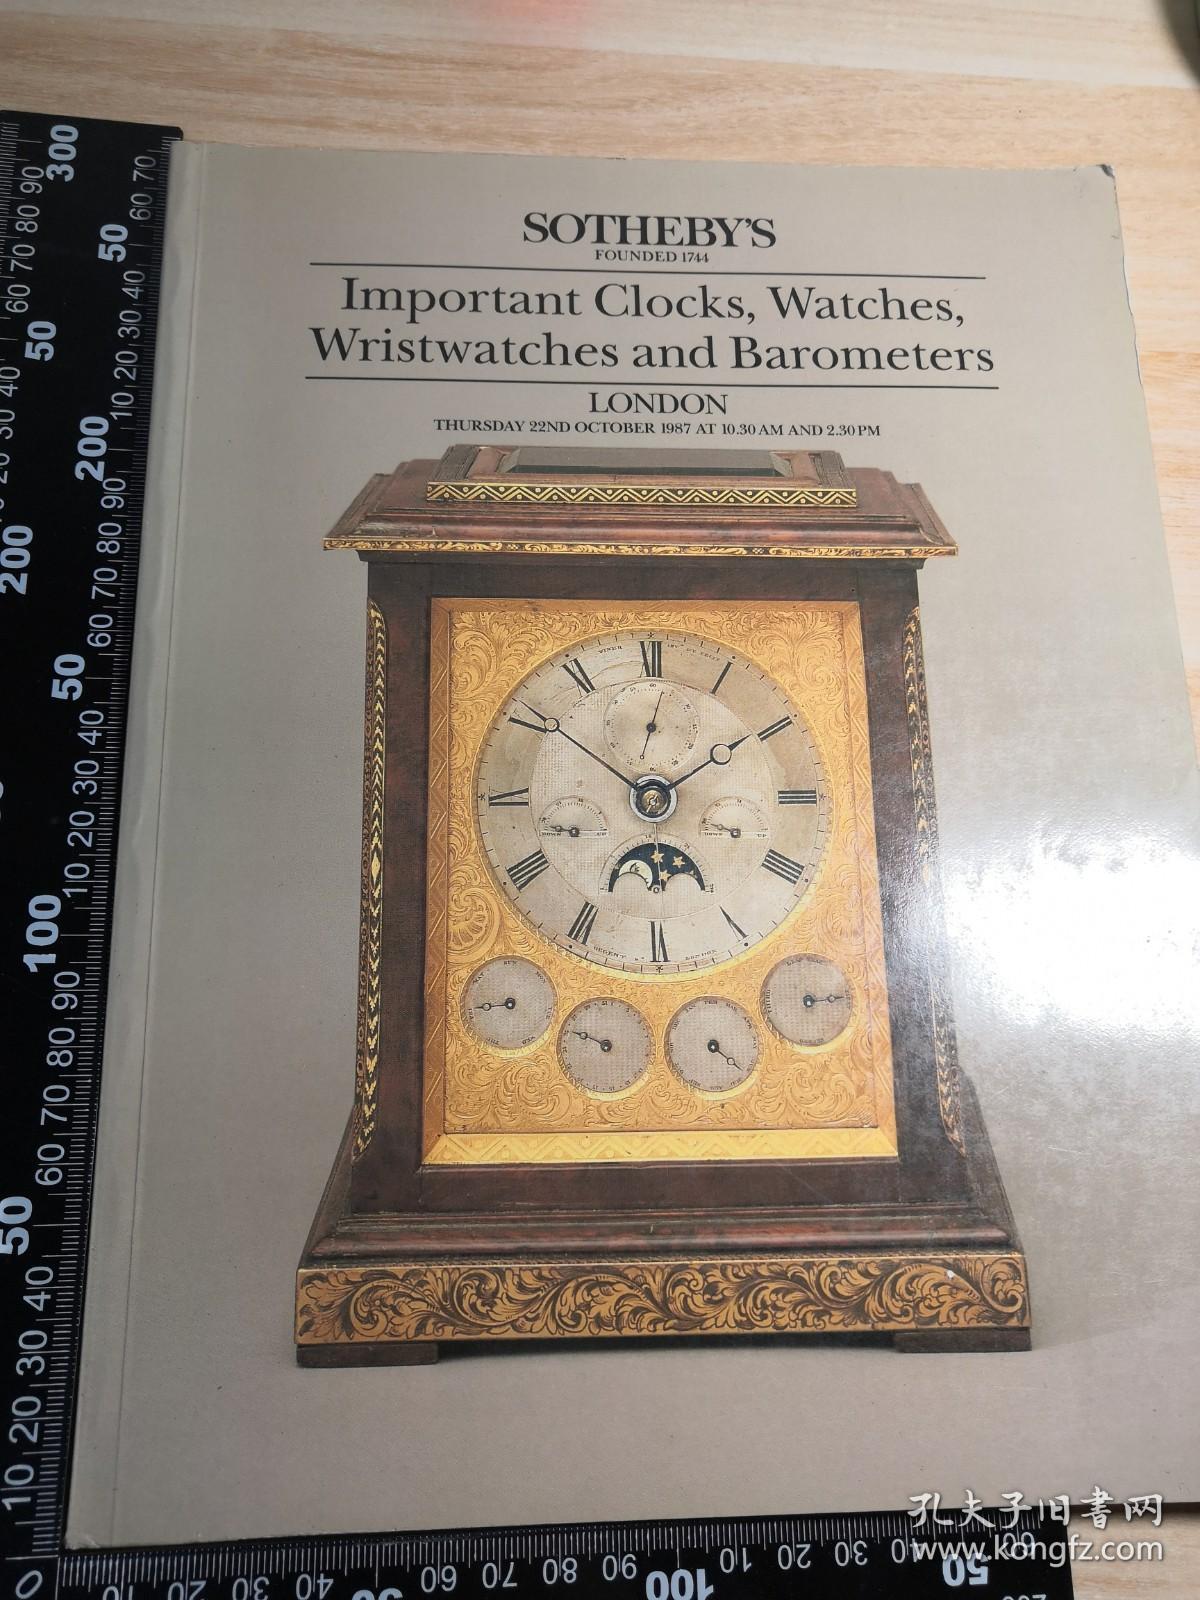 IM[ORTANT CLOCKS,WATCHES, WRISTWATCHES AND BAROMETERS  大量插图  SOTHEBEY'S   大开本 27X21CM